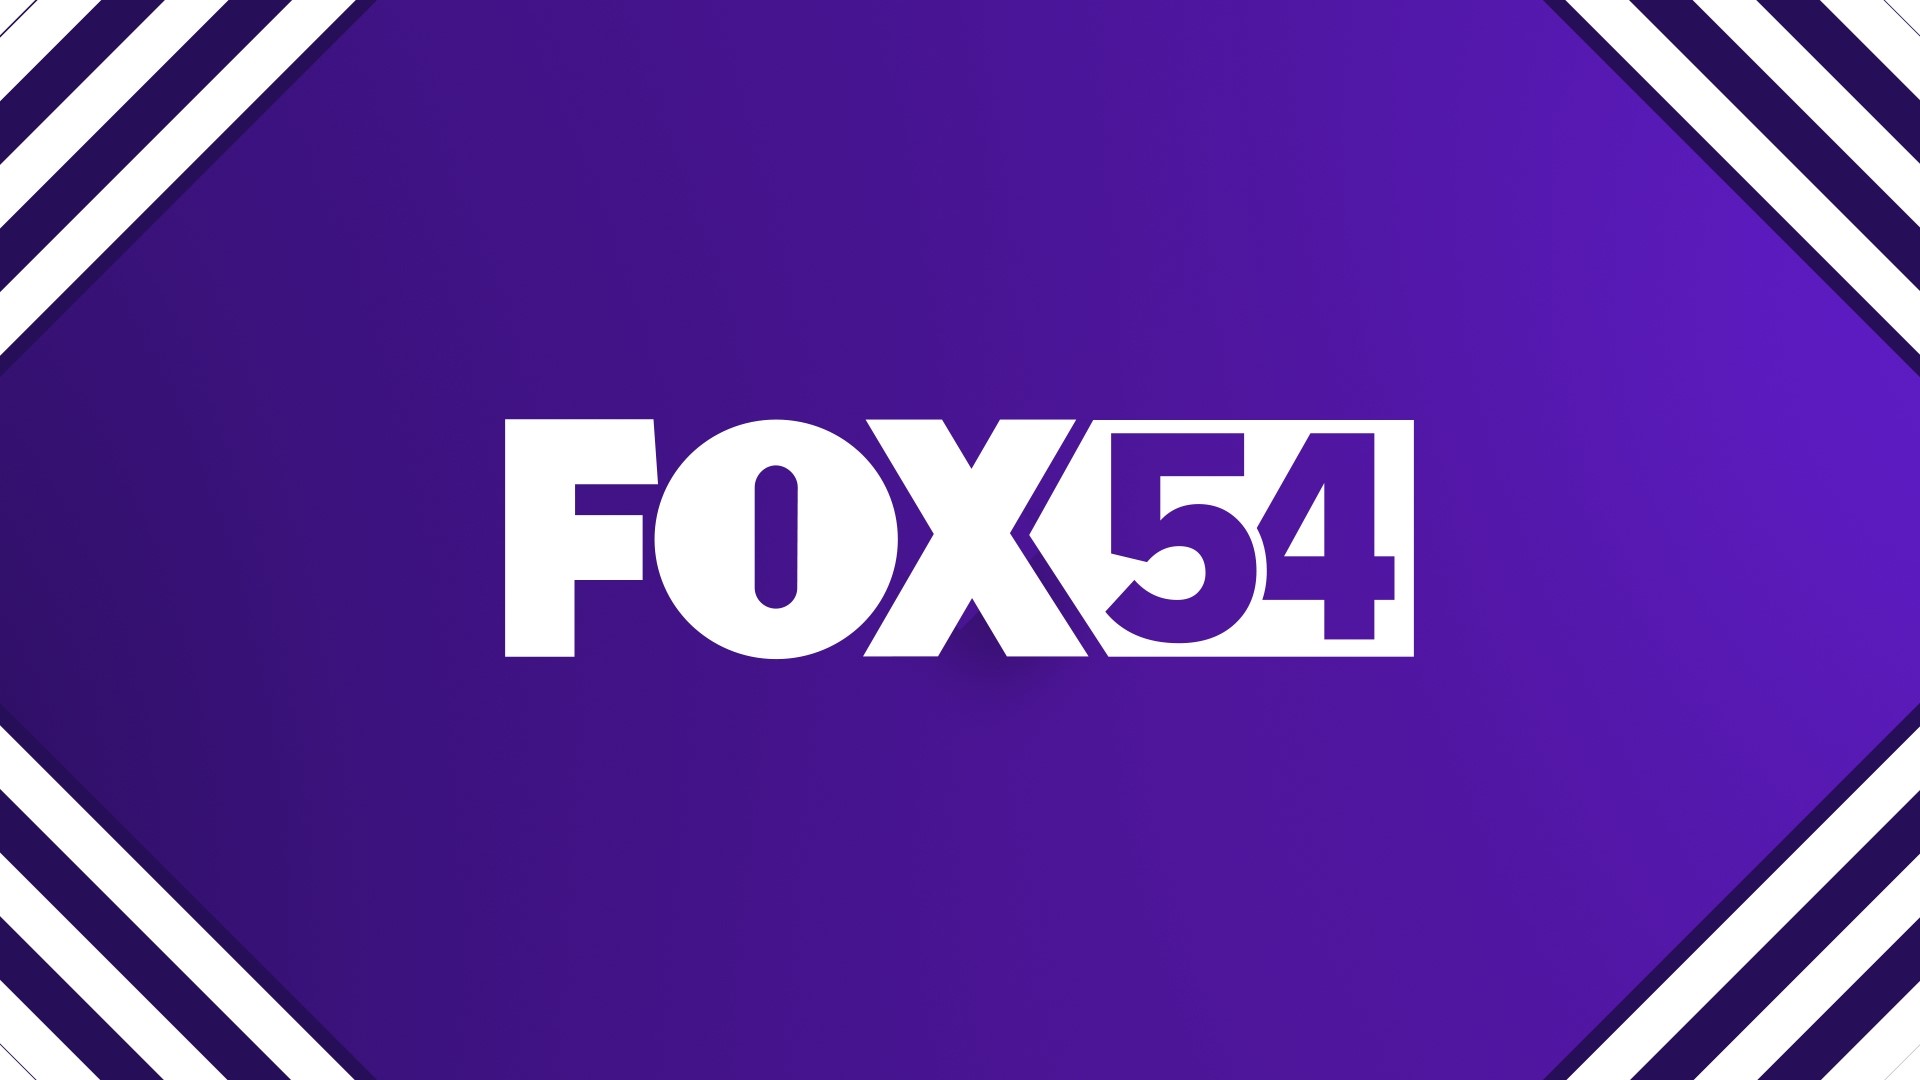 On-air. On the web. On streaming. However you get your news, FOX54 News is there.